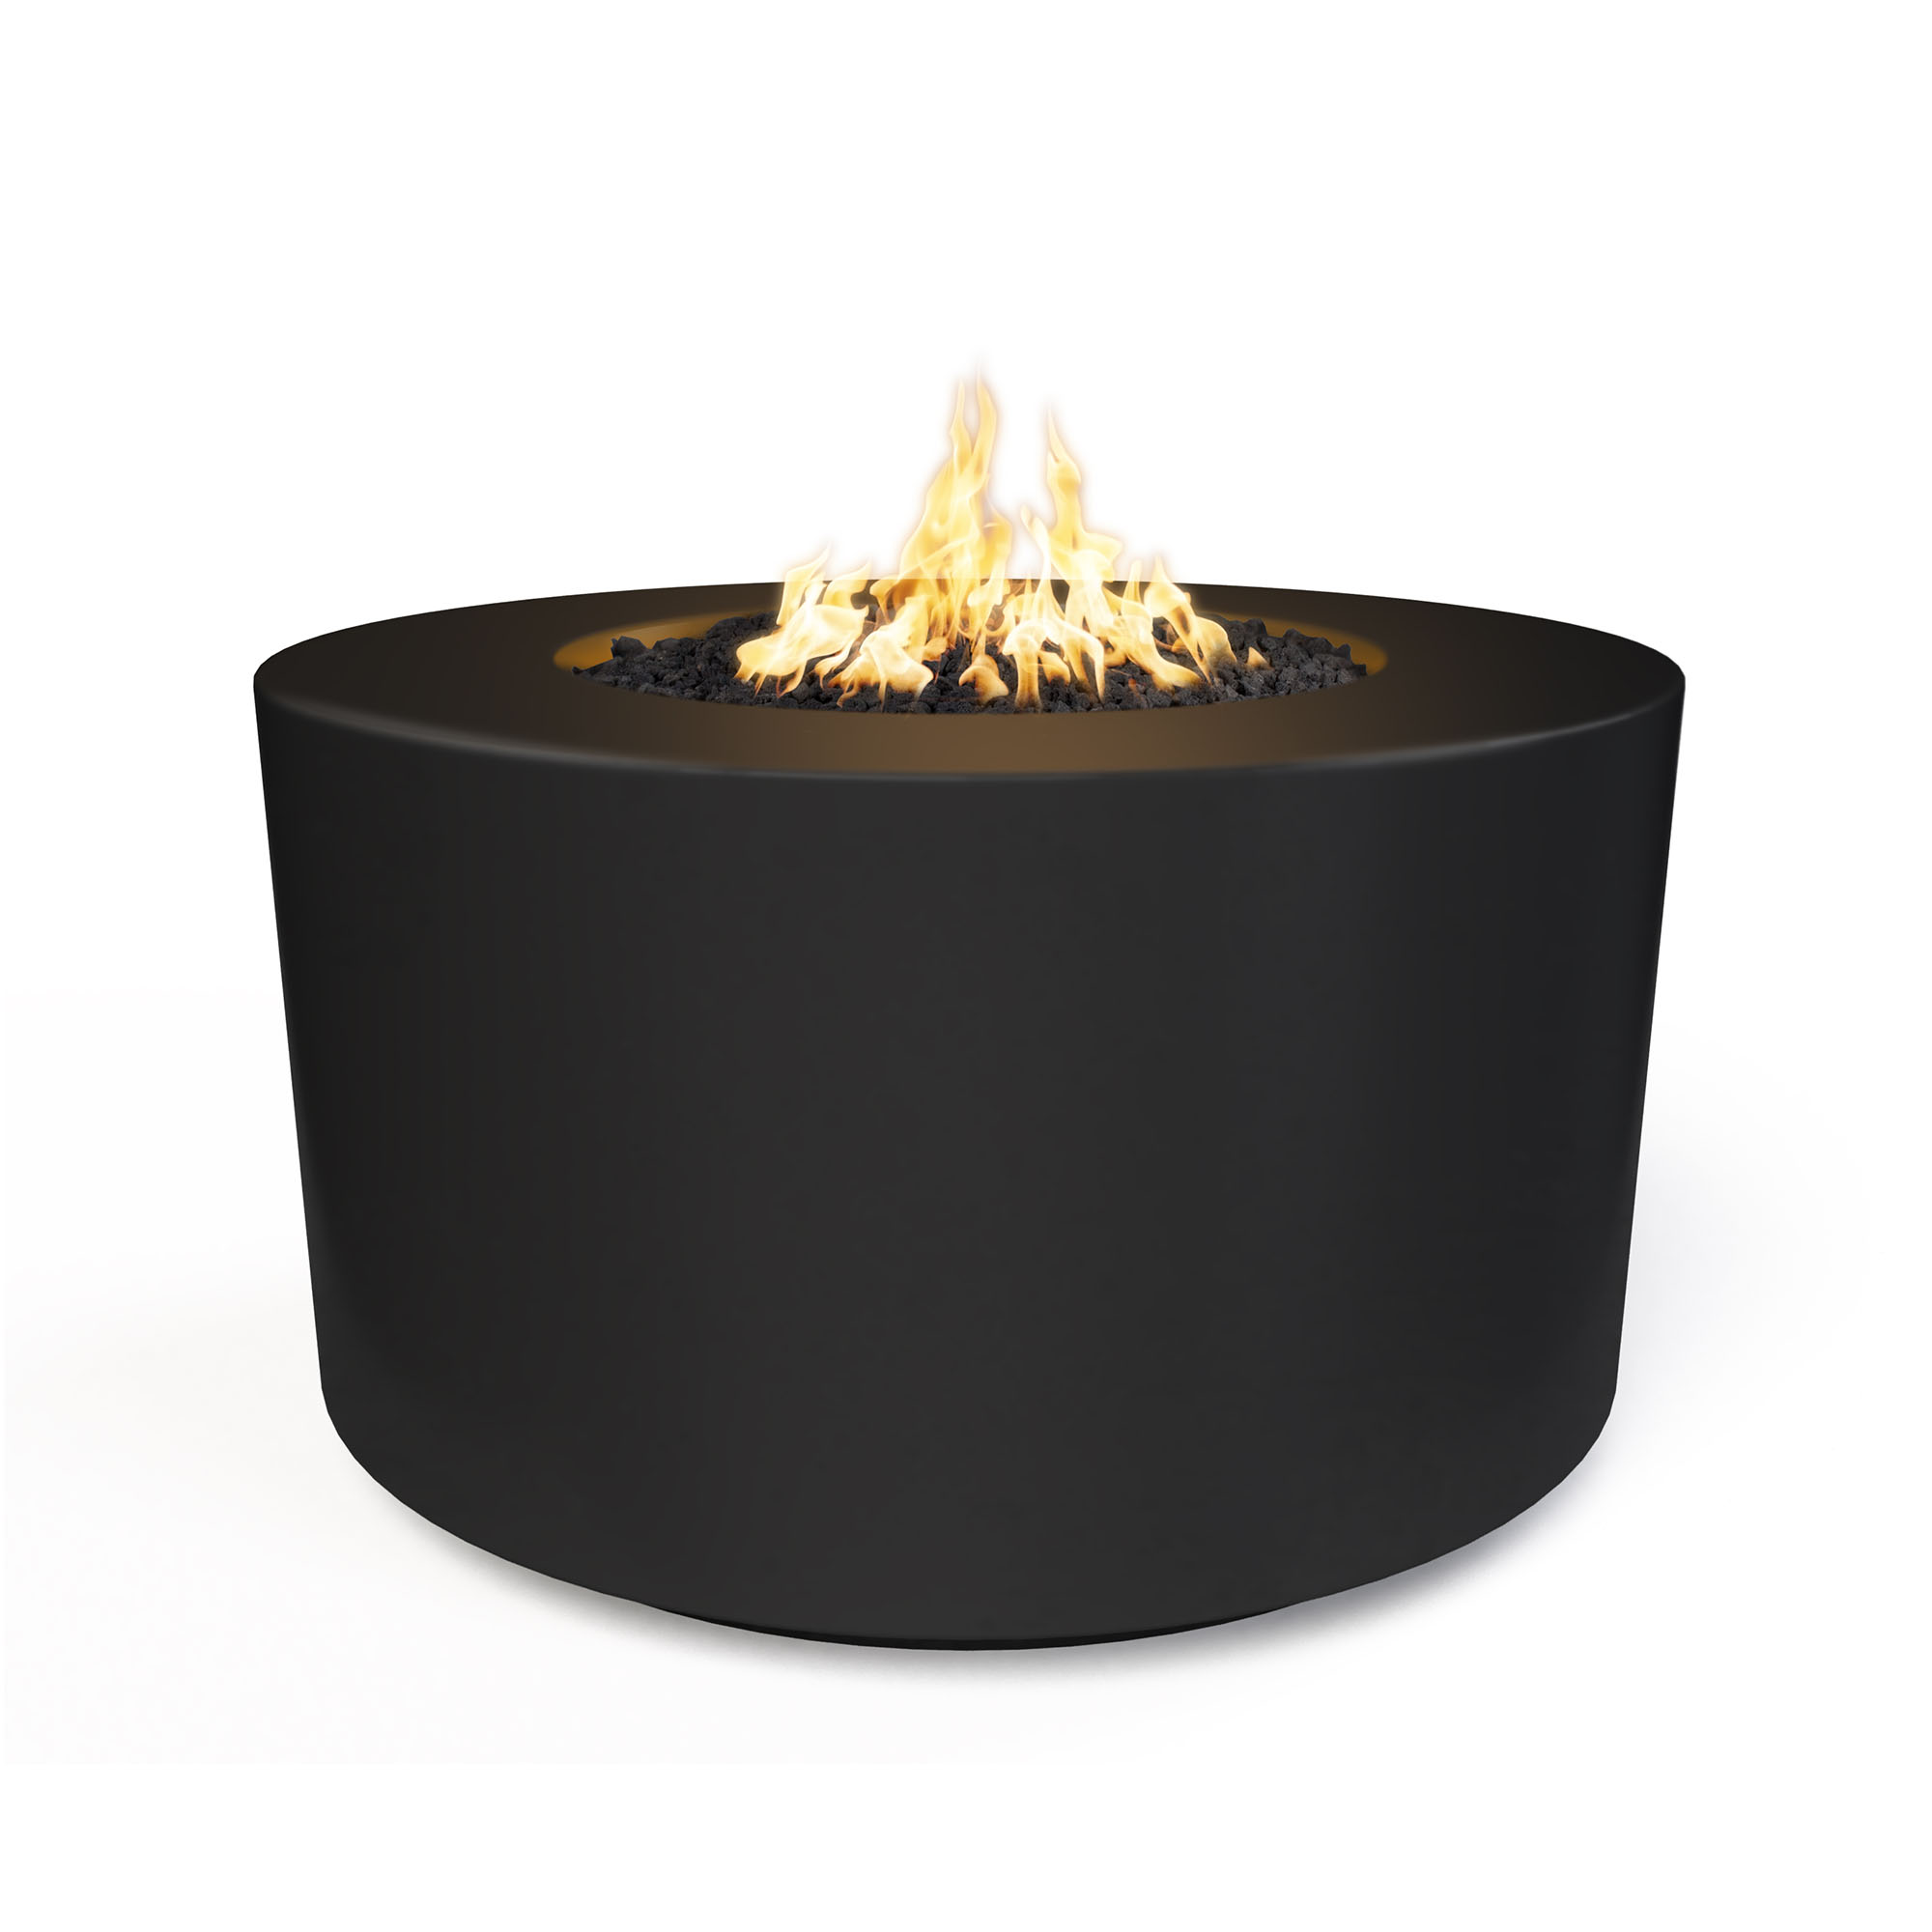 Florence GFRC Fire Pit - 24in Tall - Black